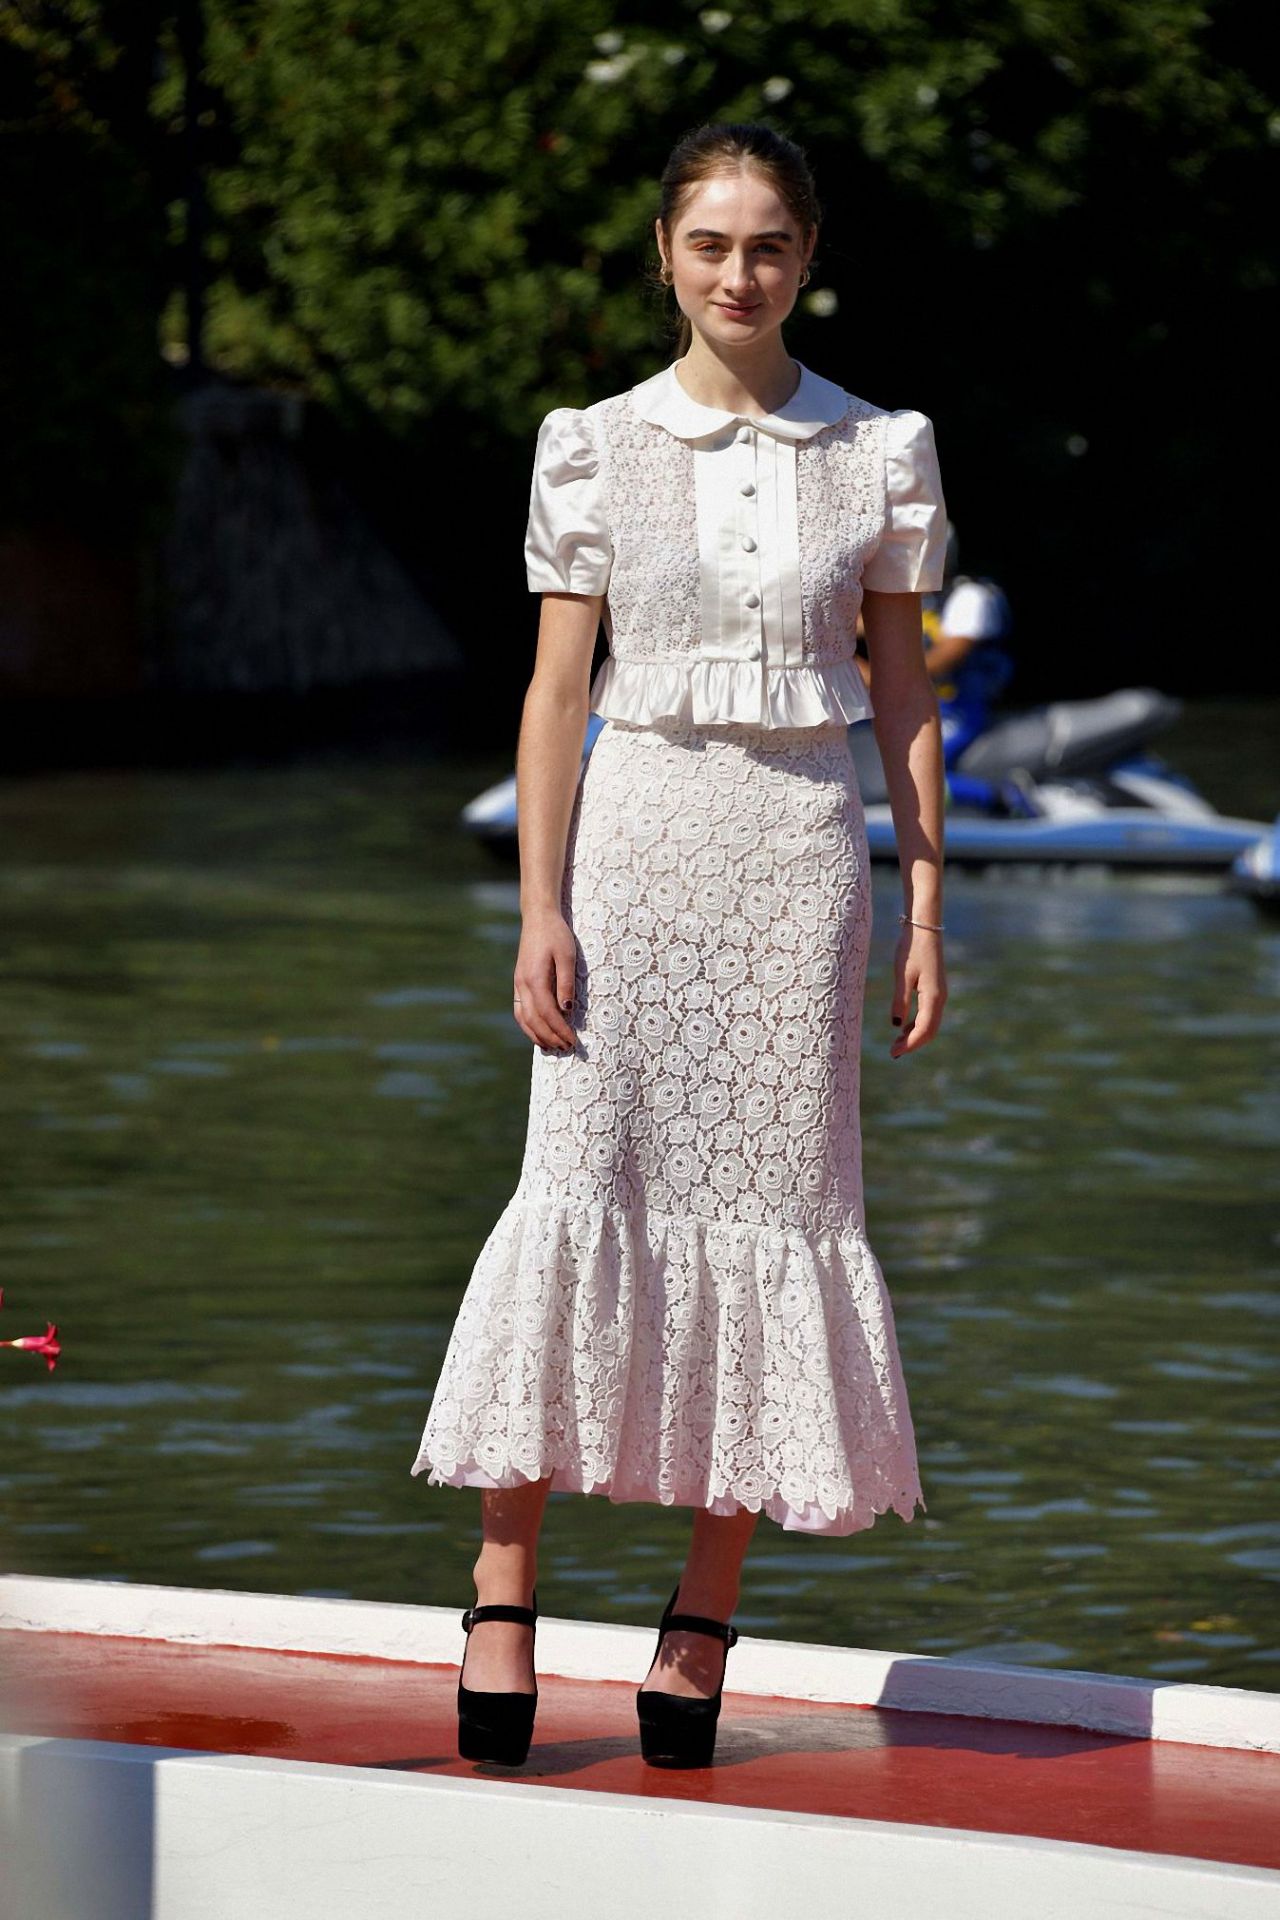 raffey-cassidy-at-the-excelsior-hotel-in-venice-italy-09-07-2020-4.jpg